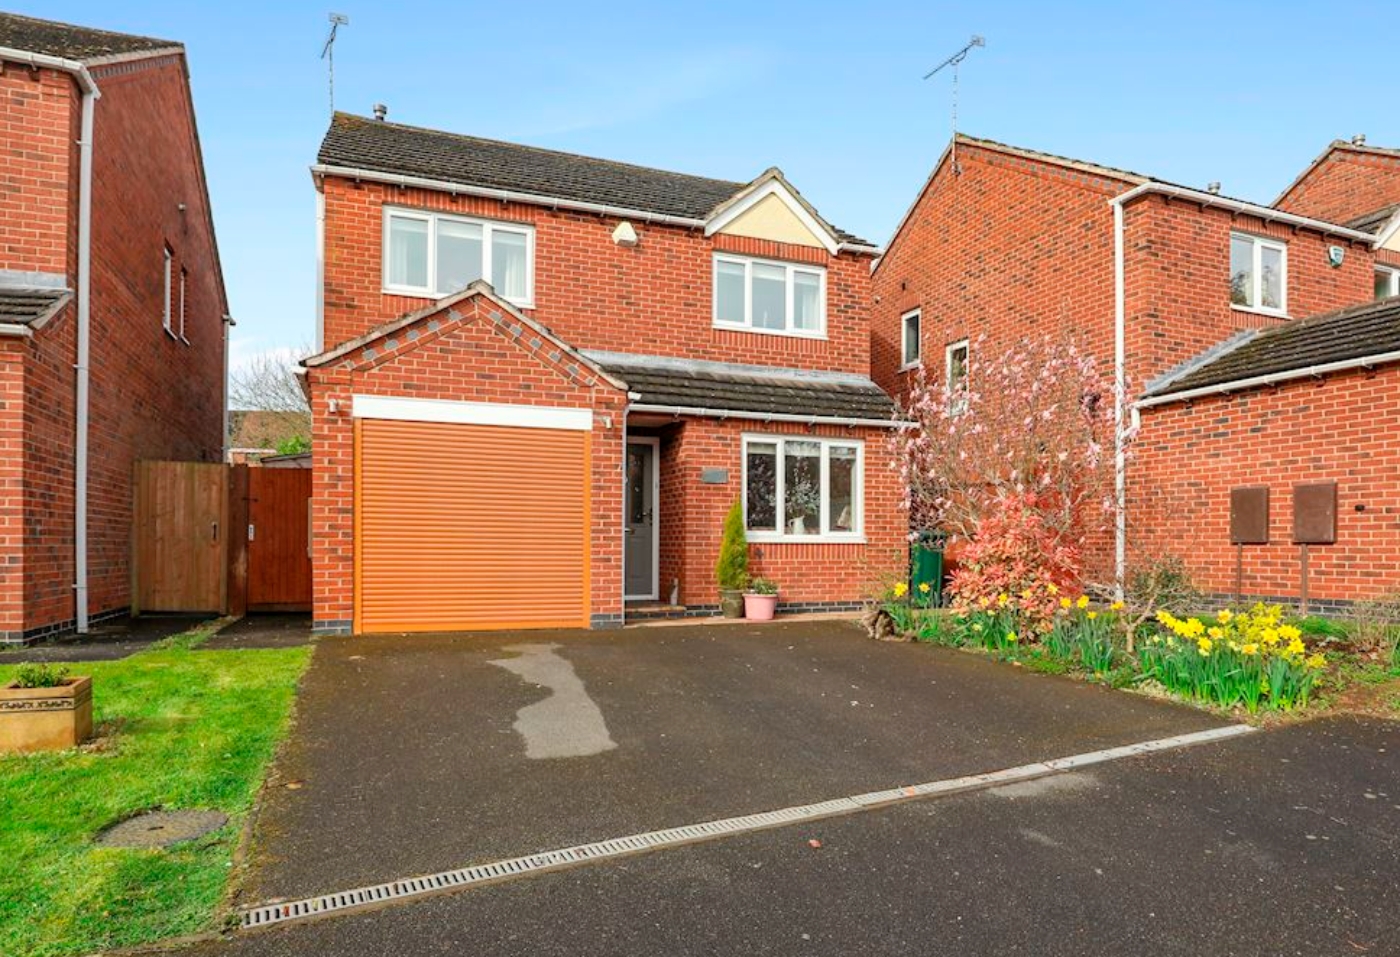 21 Forest View, Swadlincote